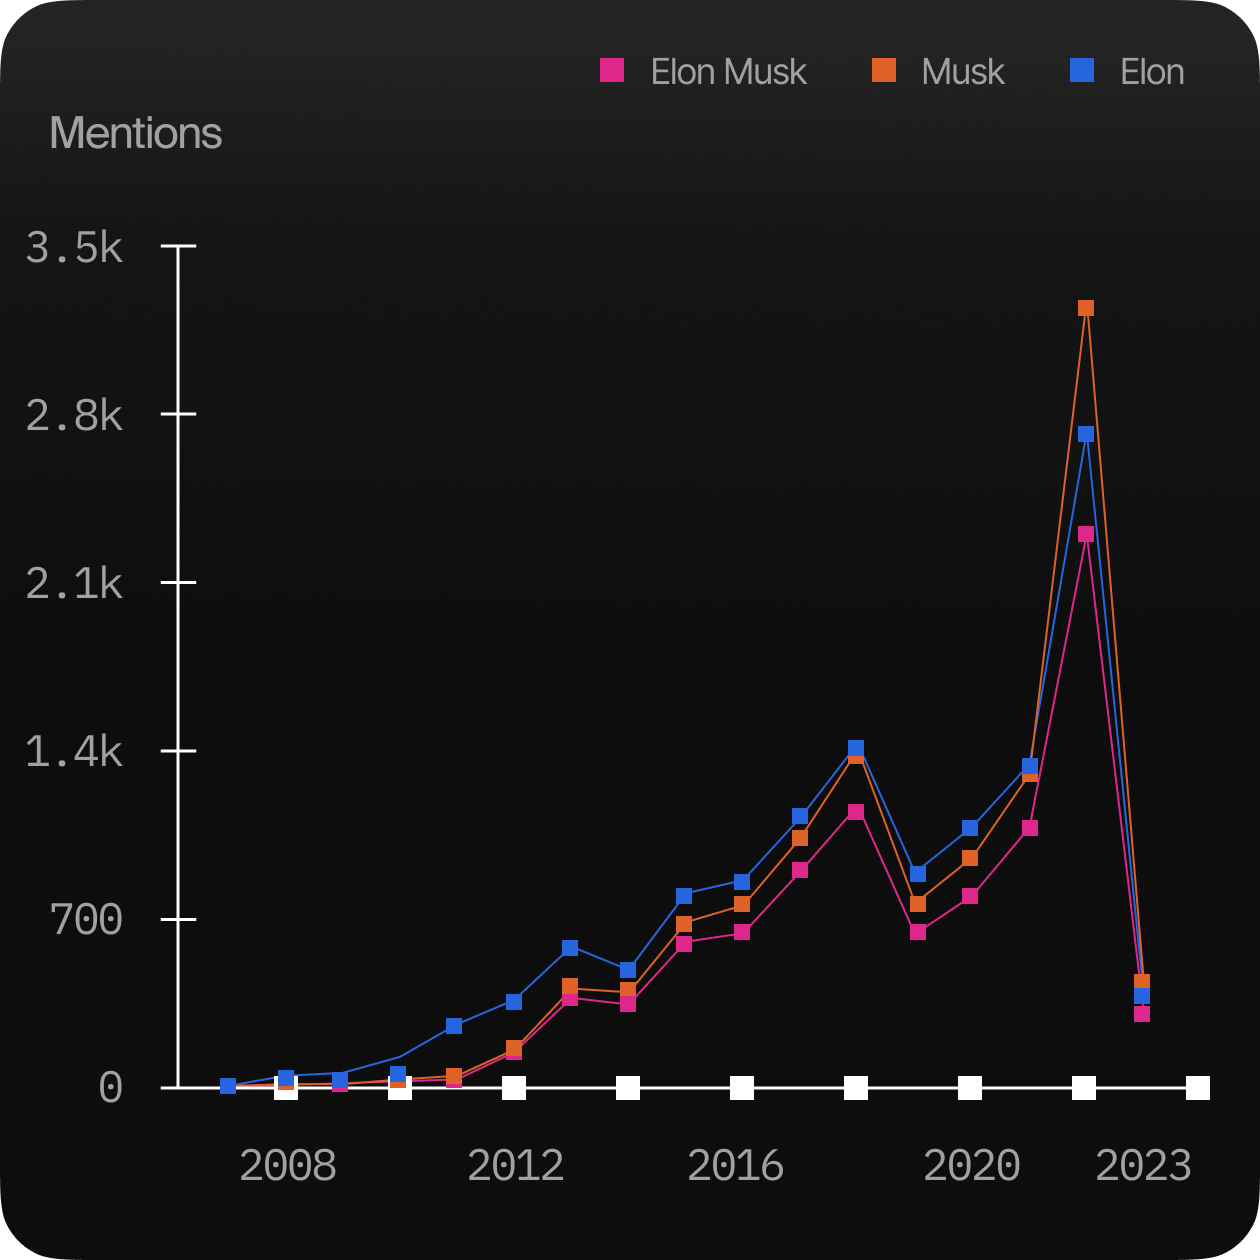 Plot | Elon Musk's mentions reached a record high in 2022, driven by the Twitter buyout news.